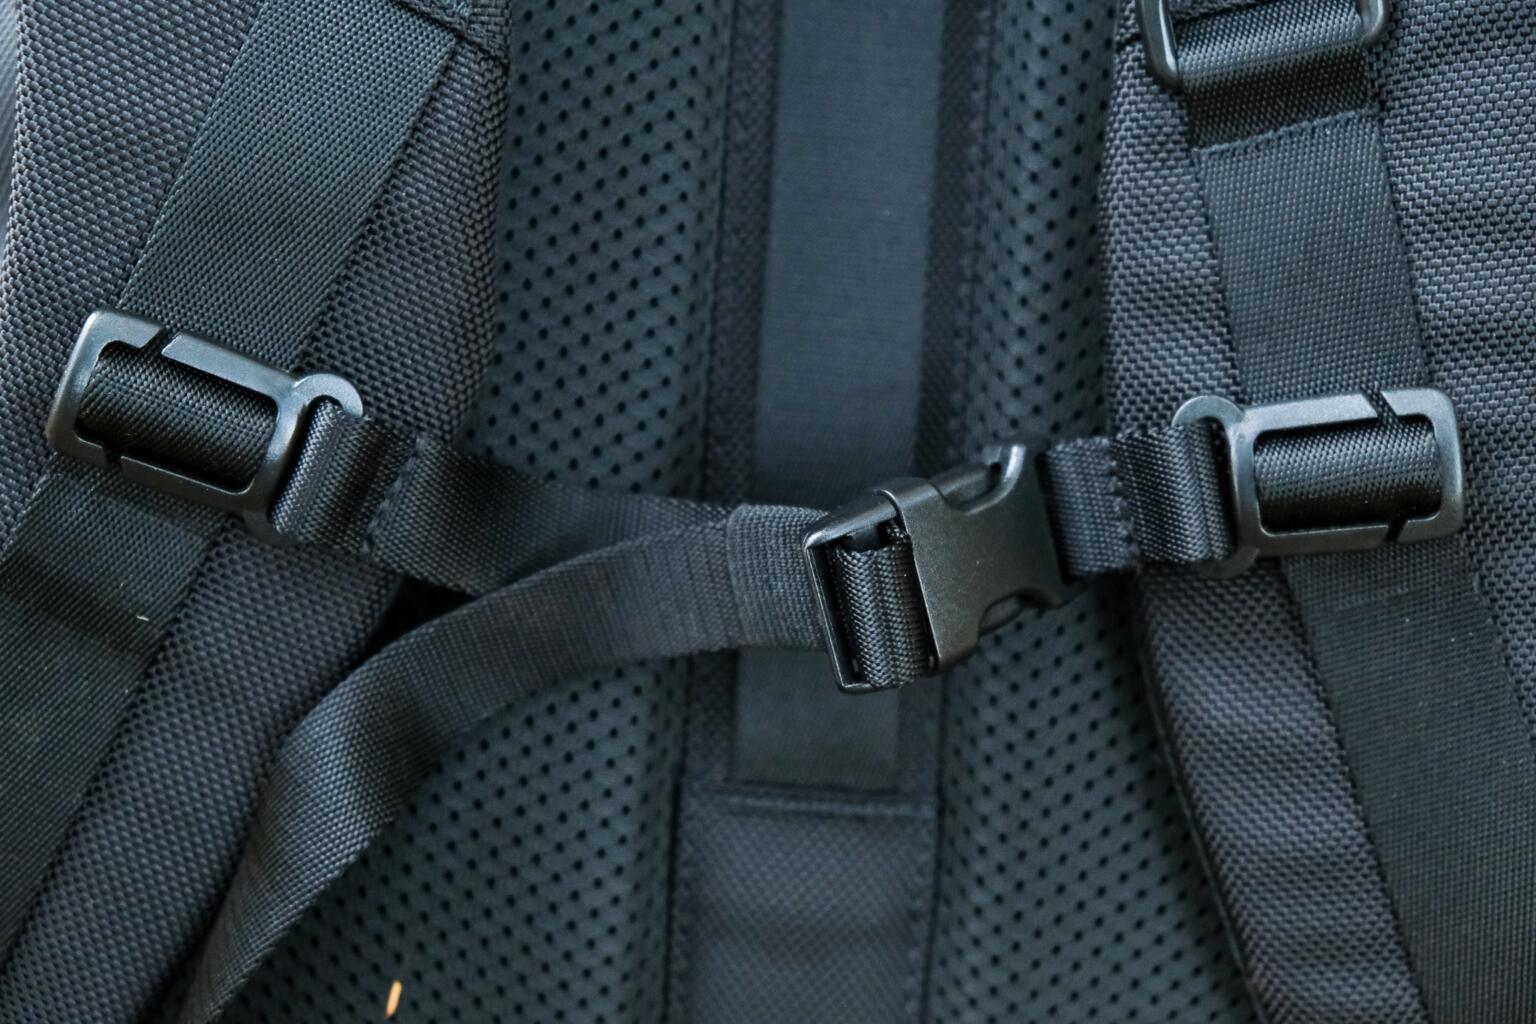 aer travel pack review